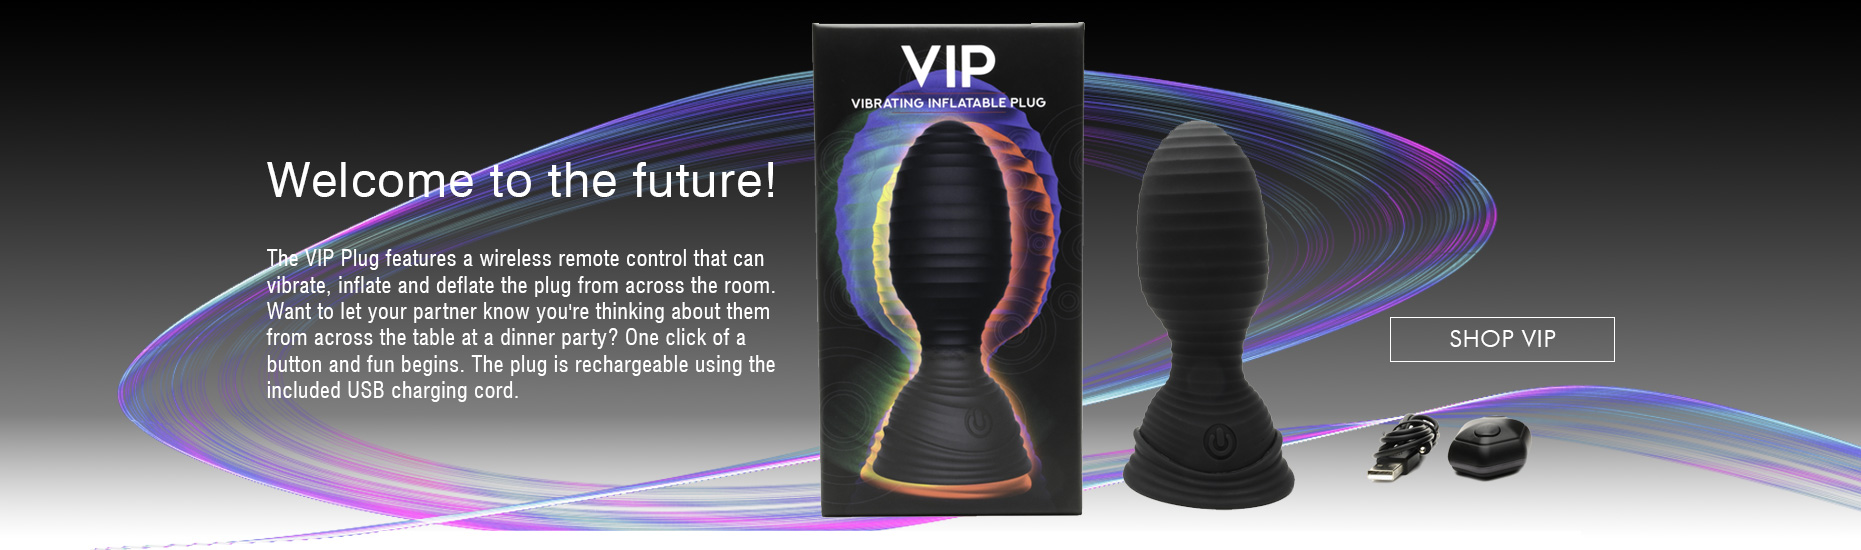 Welcome to the future! VIP The Vibrating Inflatable Plug!